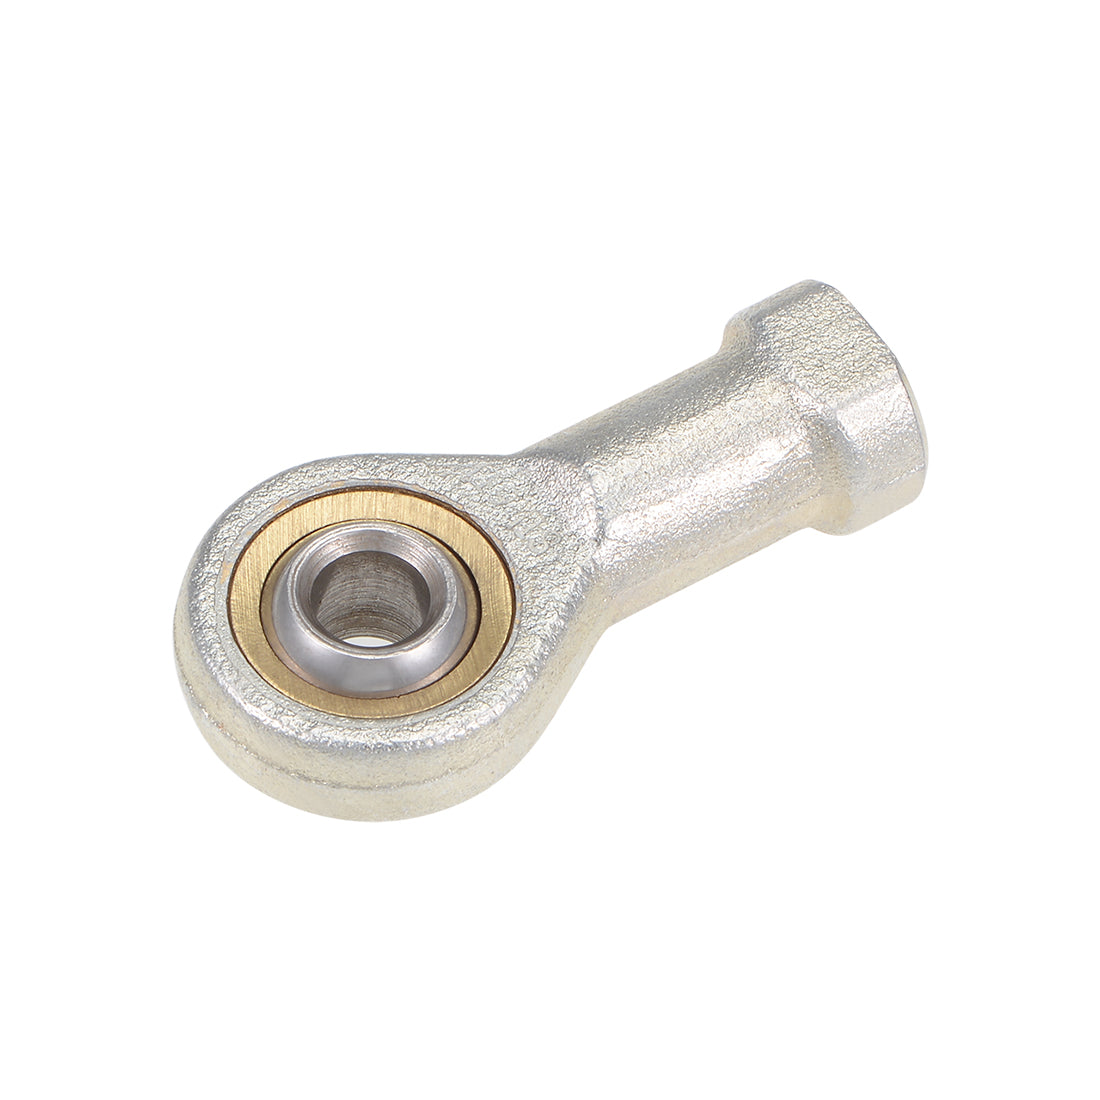 uxcell Uxcell 6mm Rod End Bearing M6x1.0mm Rod Ends Ball Joint Female Left Hand Thread